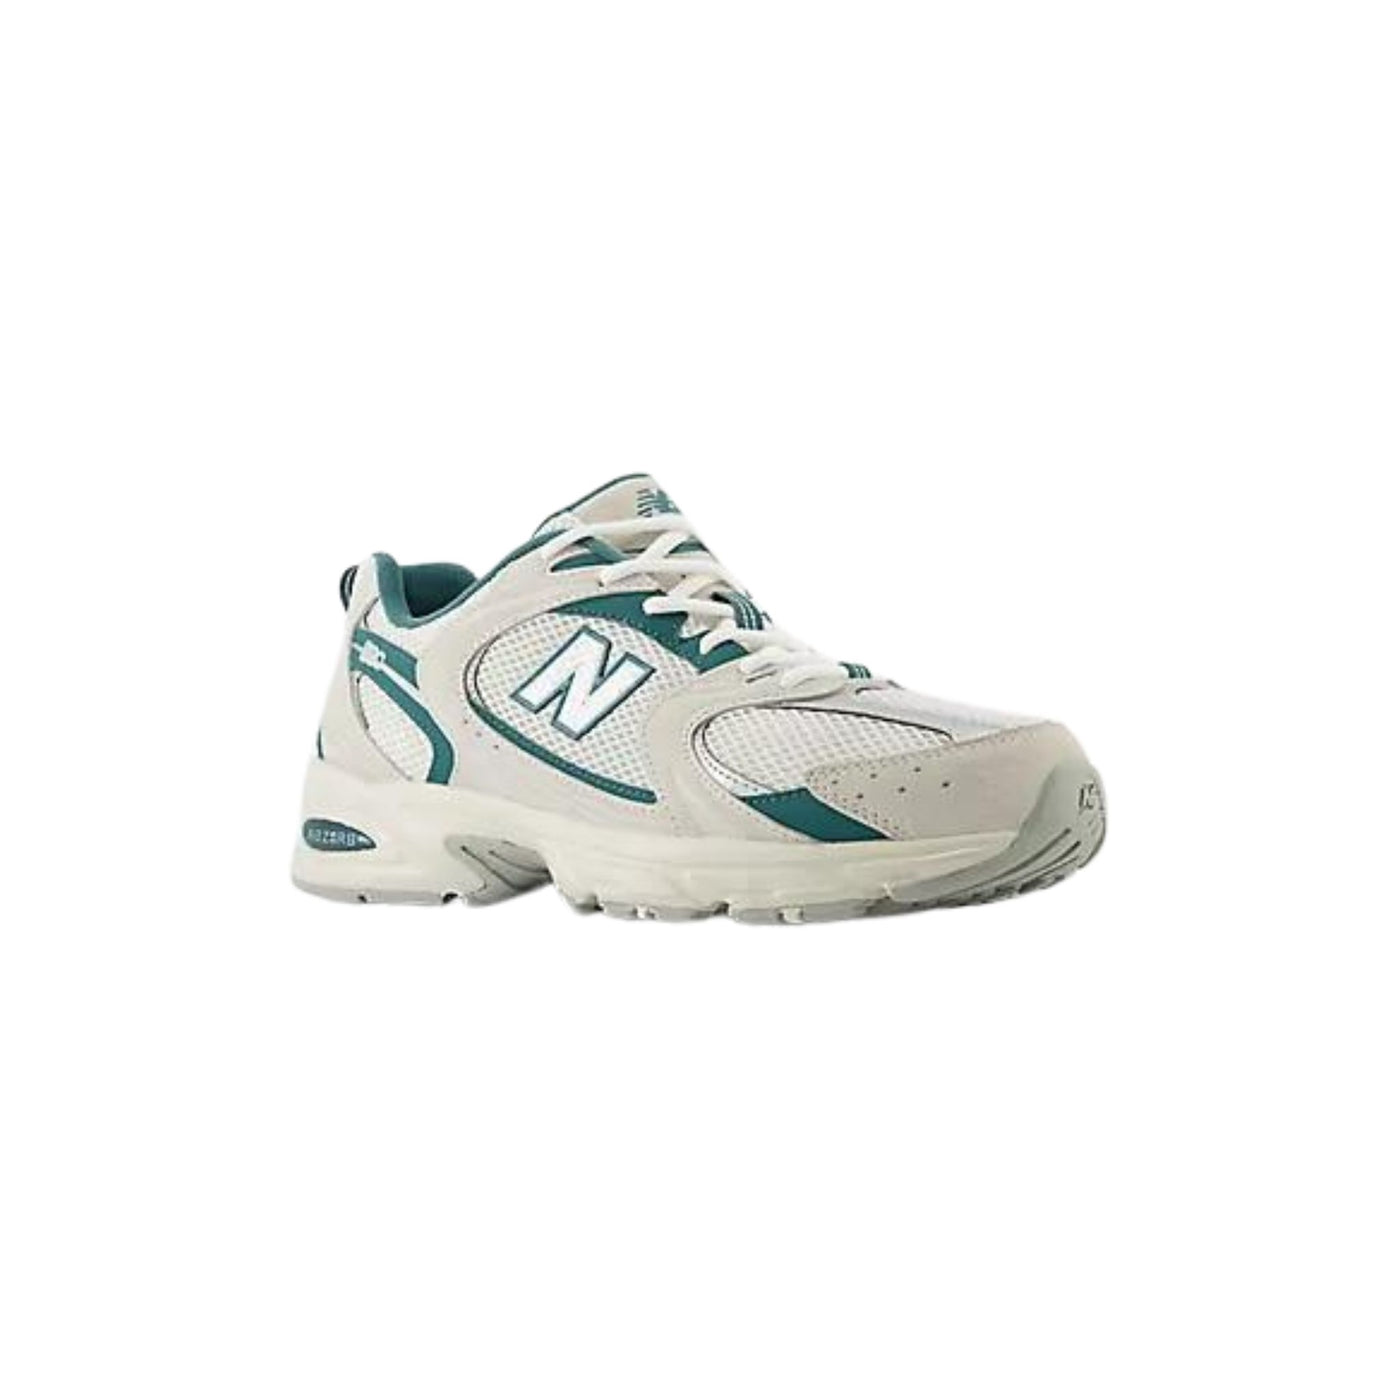 Unisex 530 model sneakers with green details